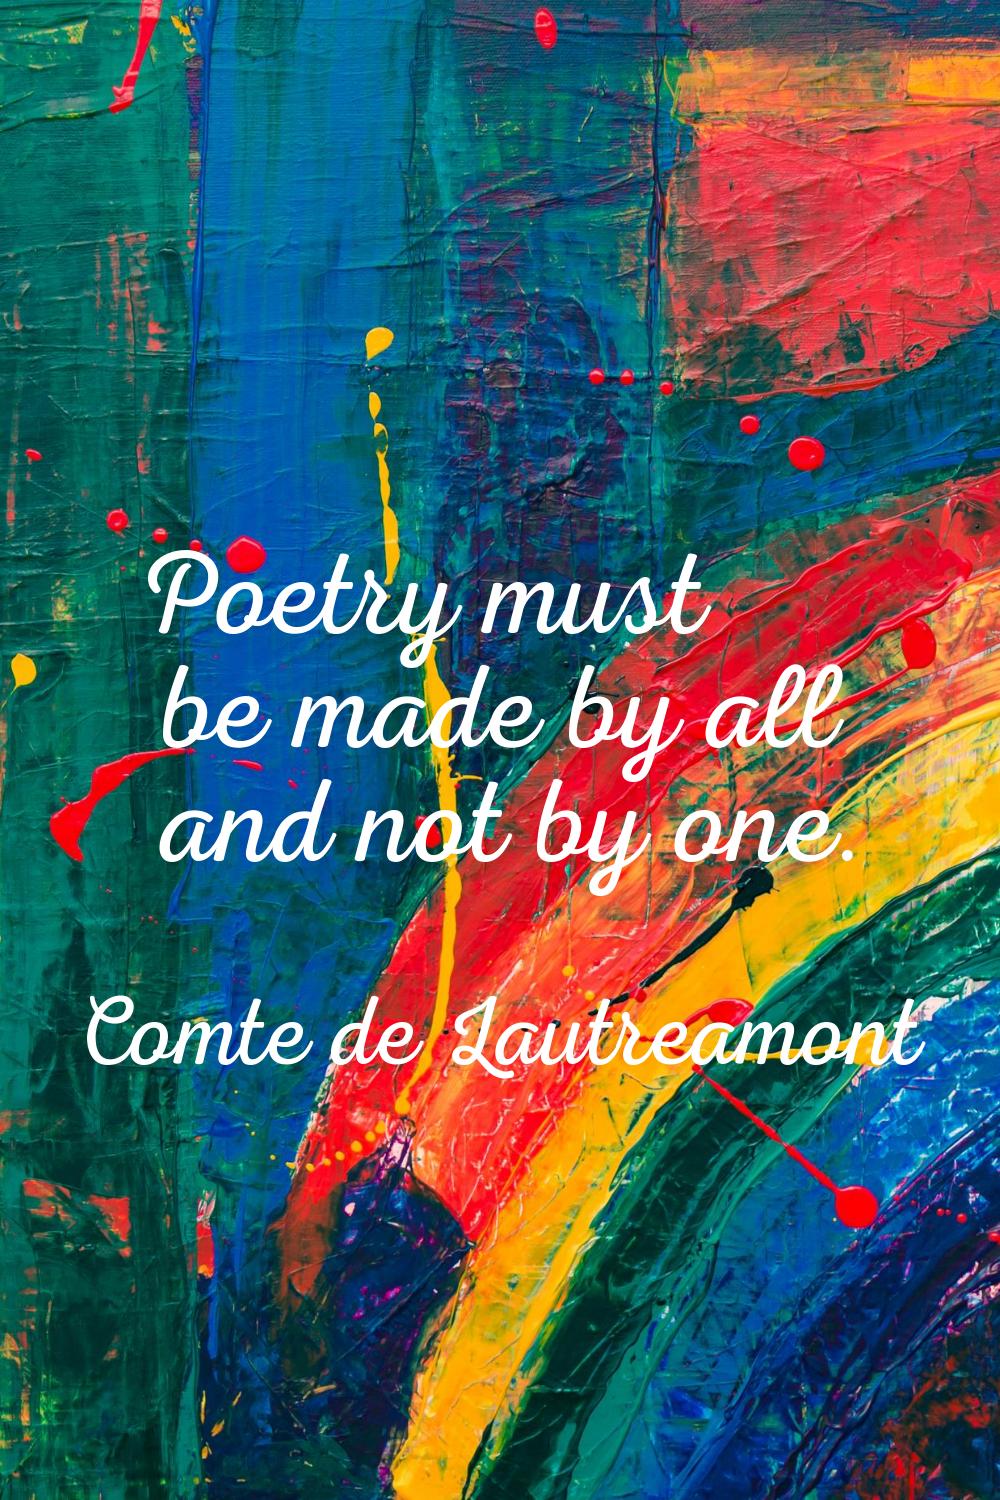 Poetry must be made by all and not by one.